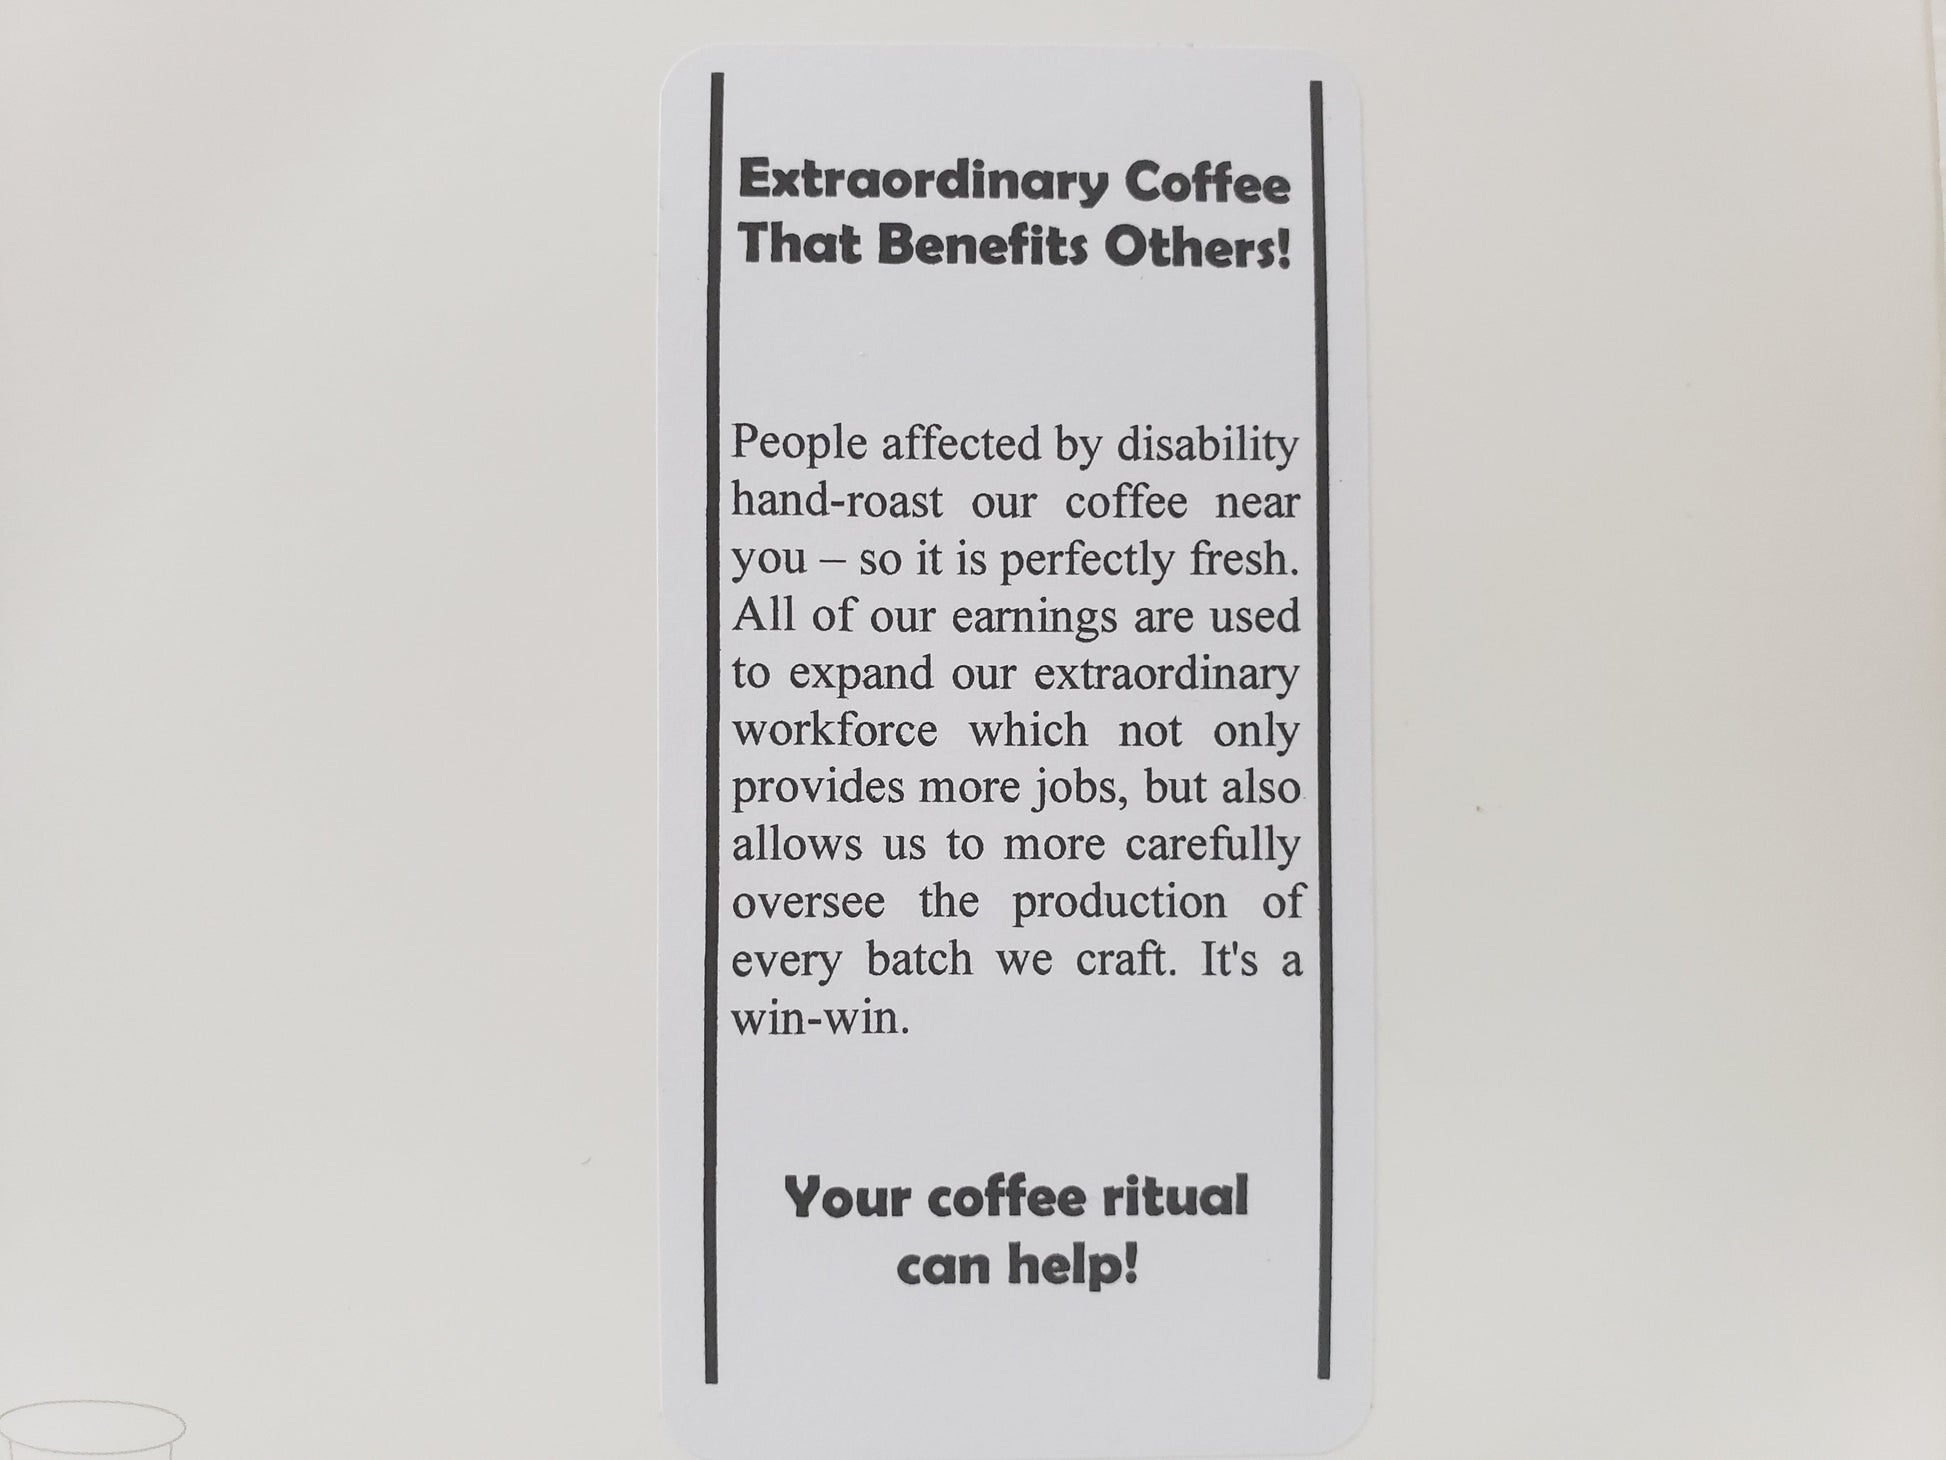 Label that says, "Extraordinary Coffee That Benefits Others! People affected by disability hand-roast our coffee near you - so it is perfectly fresh. All of our earnings are used to expand our extraordinary workforce which not only provides more jobs, but also allows us to more carefully oversee the production for every batch we craft. It's a win-win. Your coffee ritual can help!